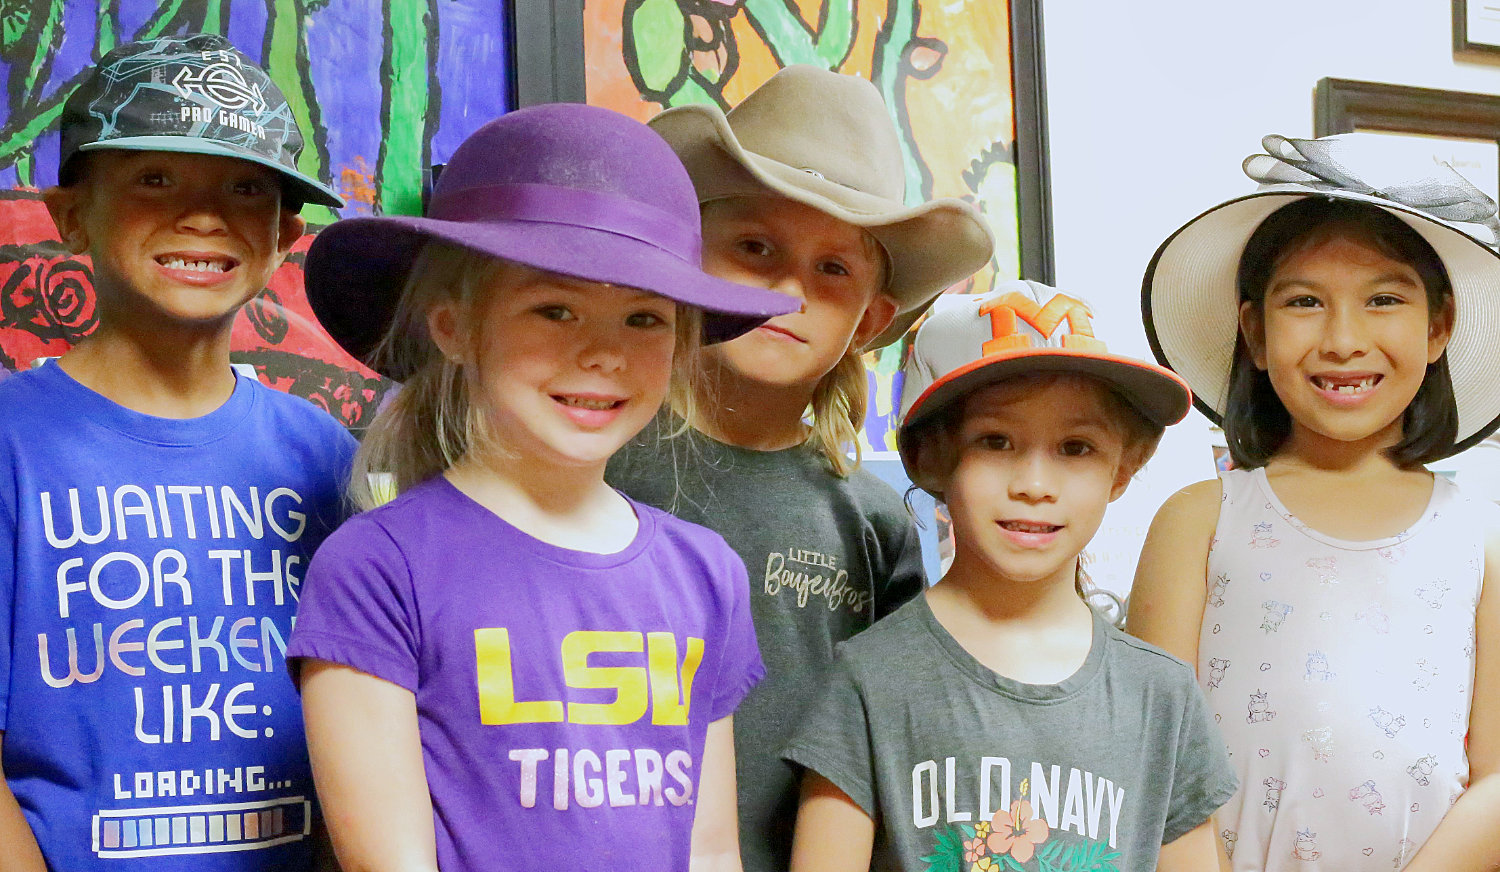 Mineola Elementary School students don various head wear in support of classmate Isabelle Riley. Her sister, first-grader Alaina Alons (in purple fedora), is pictured with classmates (from left) Triston Milton, Brayden Walkley, Mia Martin and Felicia Gonzalez.